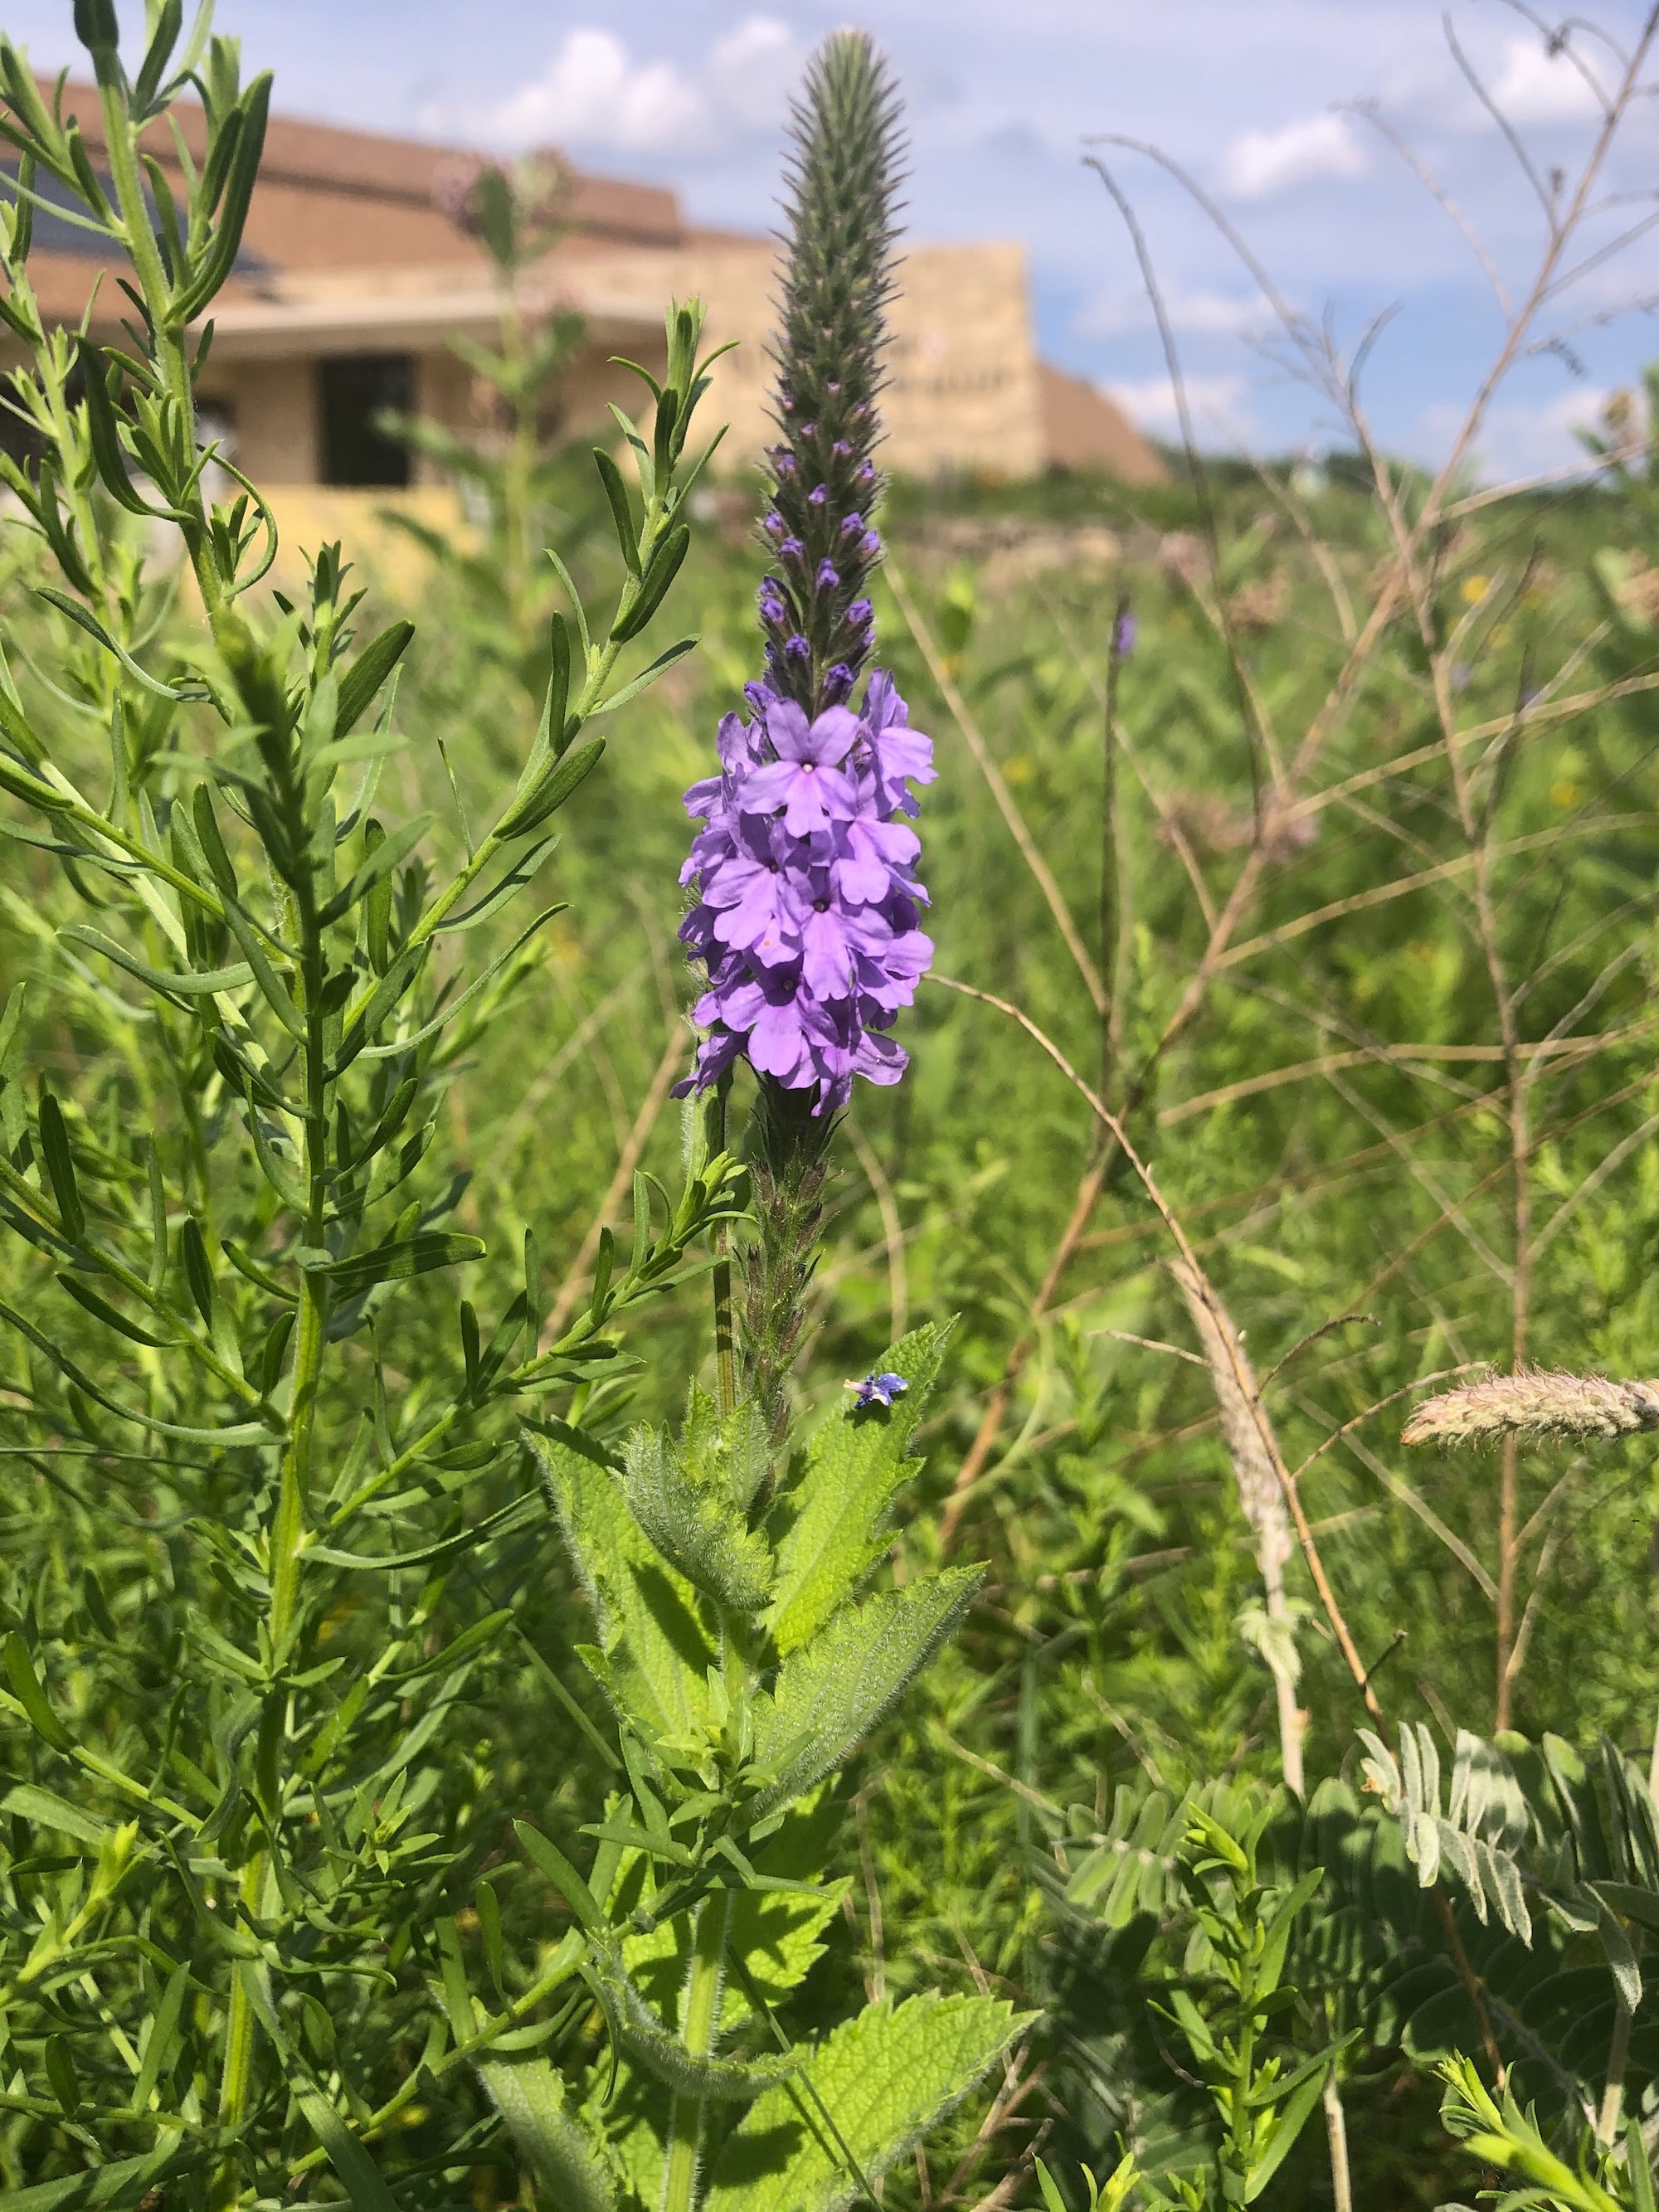 Hoary Vervain next to the UW Arboretum Visitors Center parking lot on July 1, 2020.